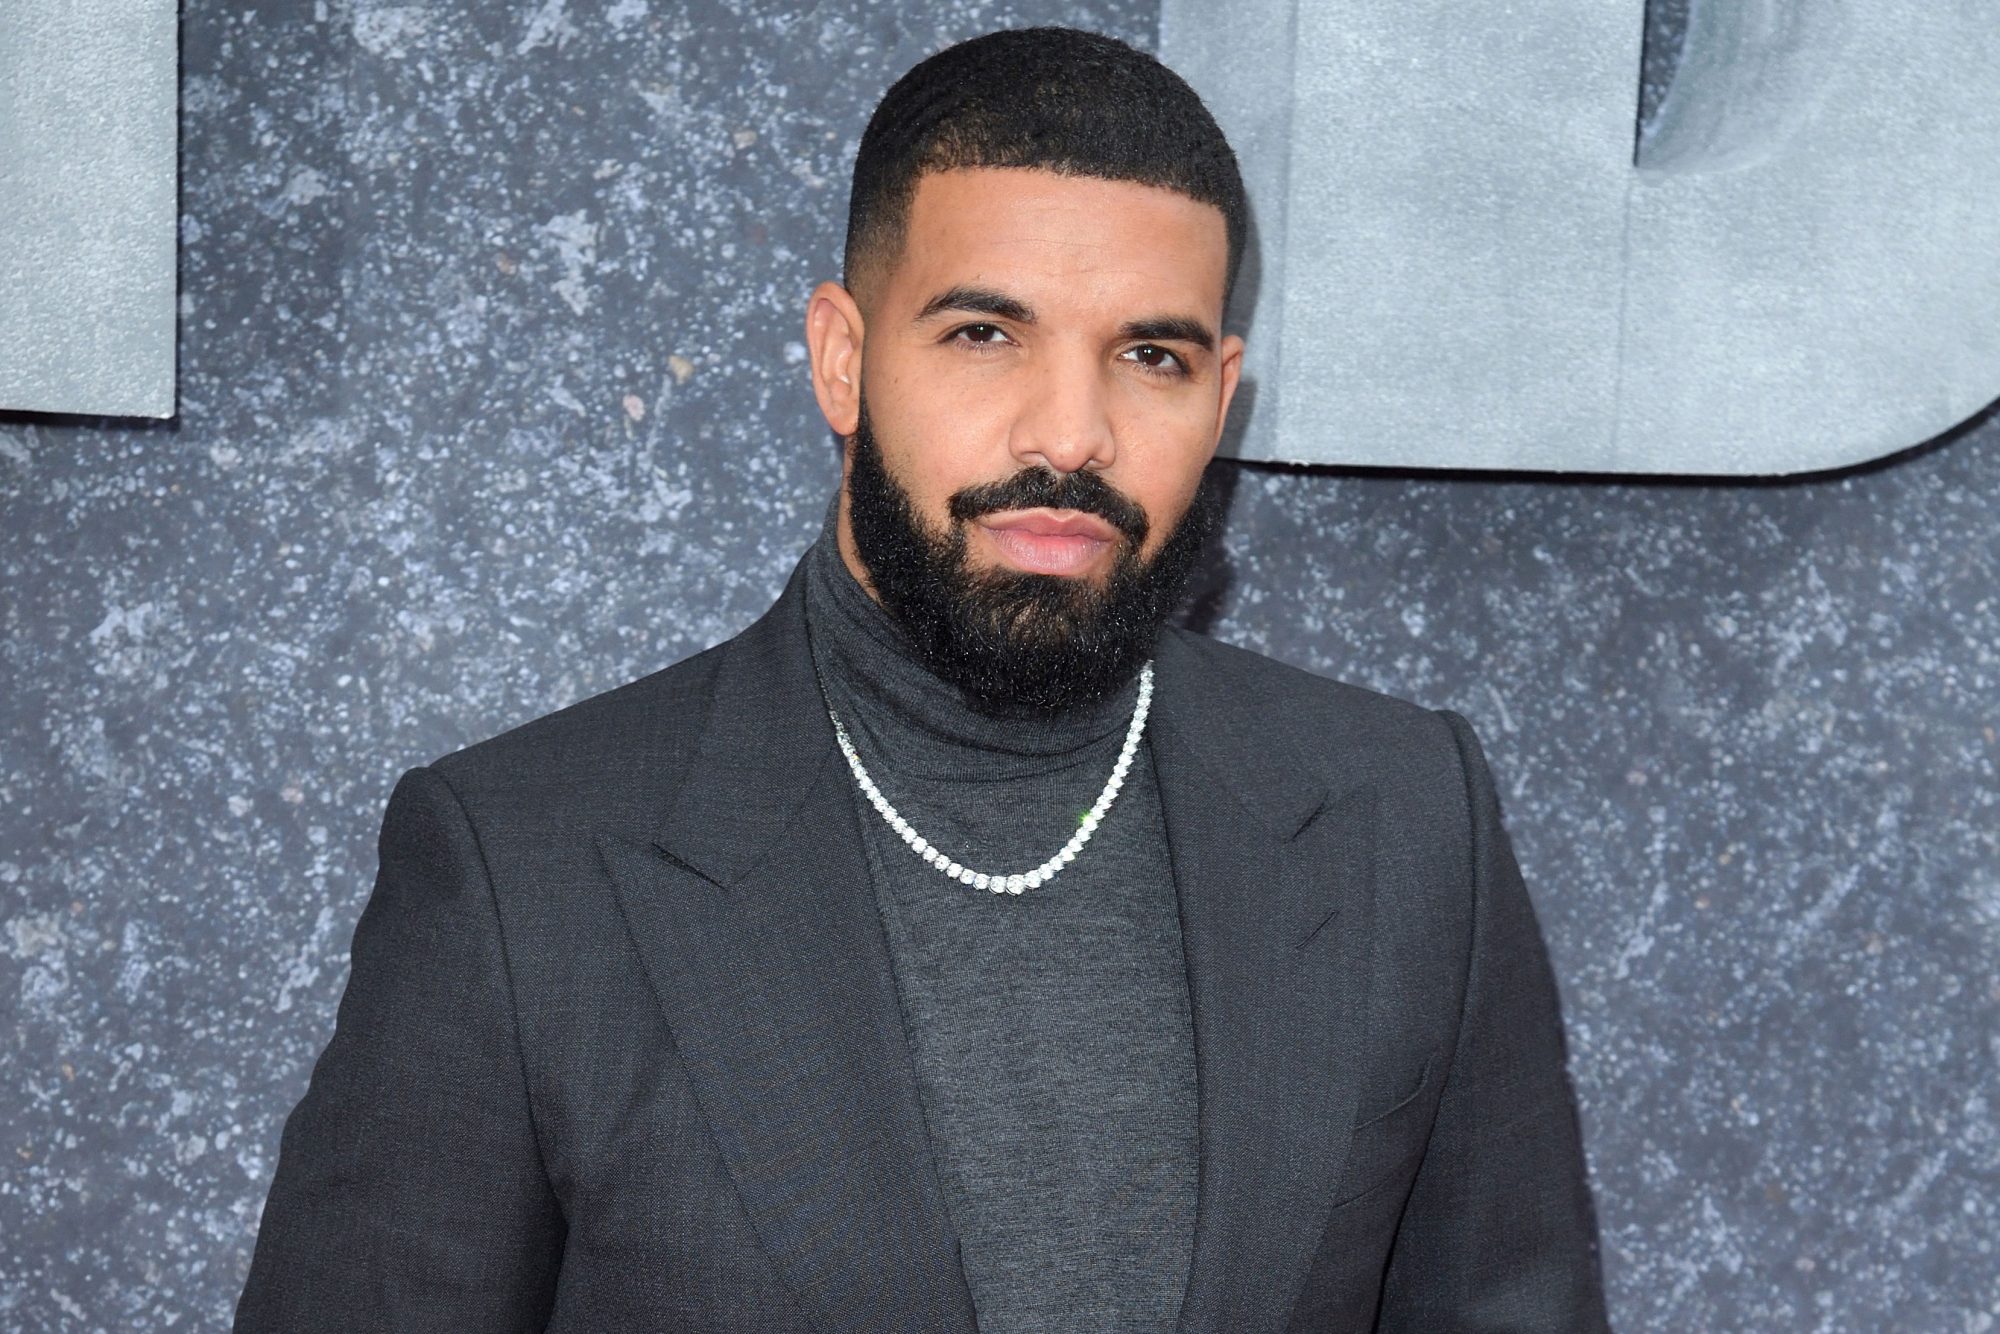 LONDON, ENGLAND - SEPTEMBER 04: Drake attends the "Top Boy" UK Premiere at Hackney Picturehouse on September 04, 2019 in London, England. (Photo by Karwai Tang/WireImage)